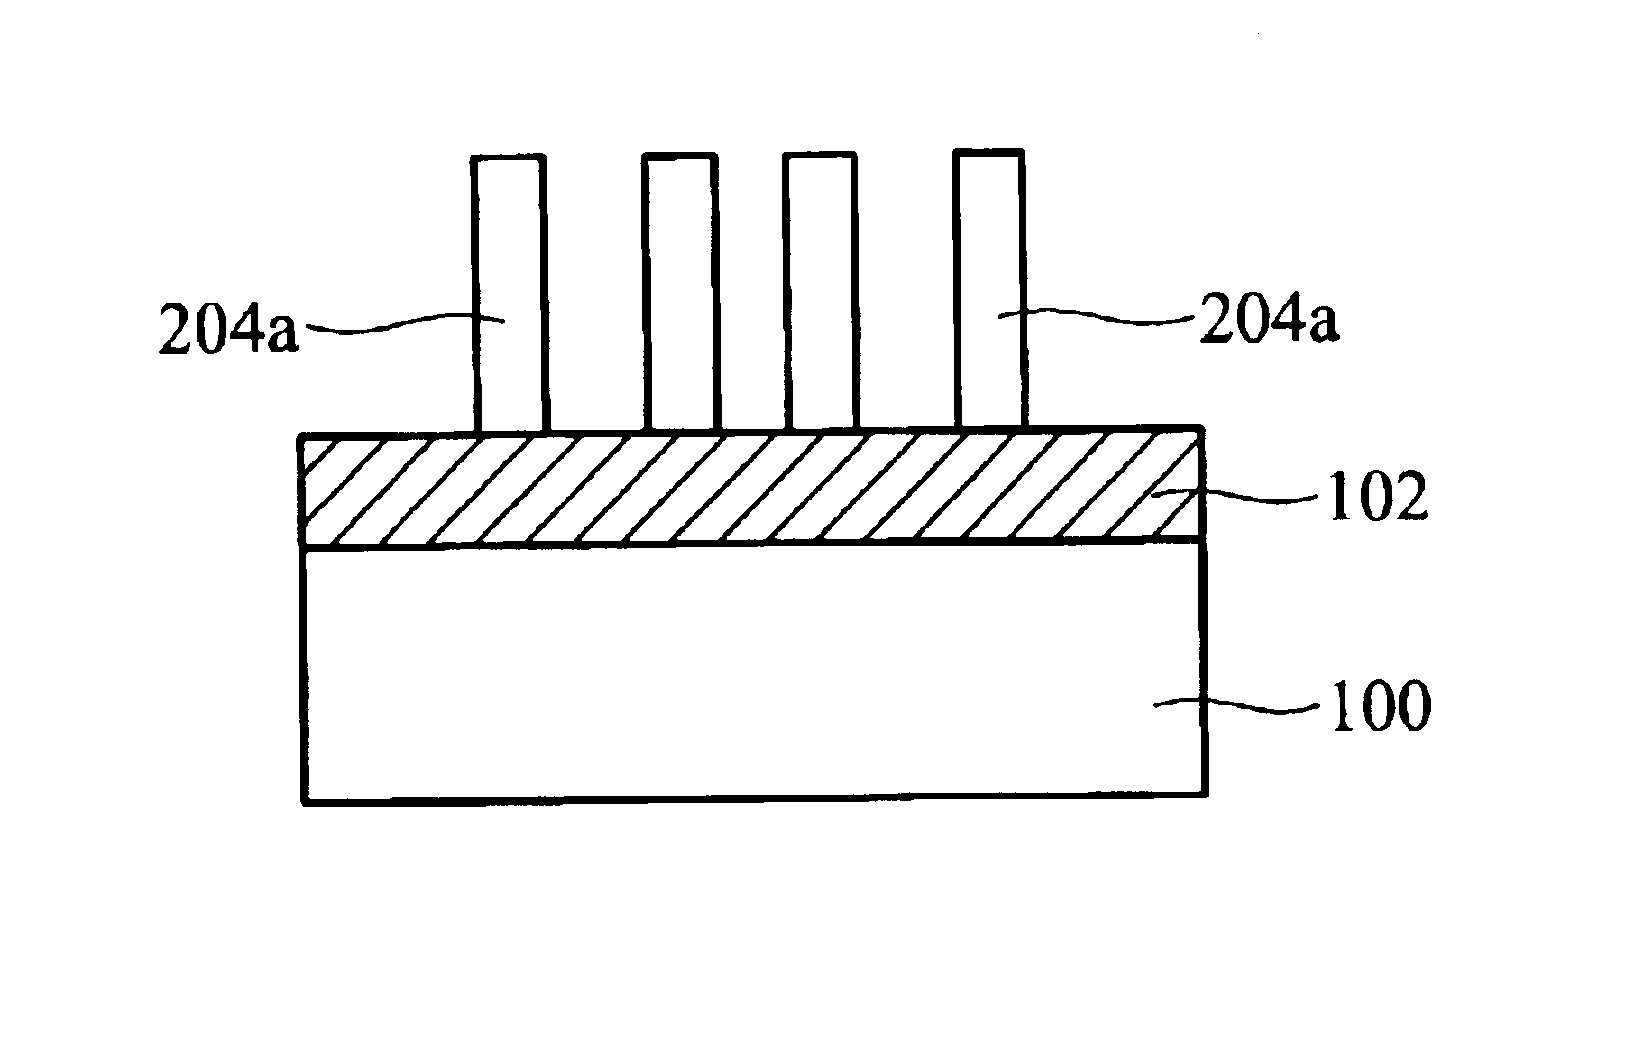 Method of preventing repeated collapse in a reworked photoresist layer